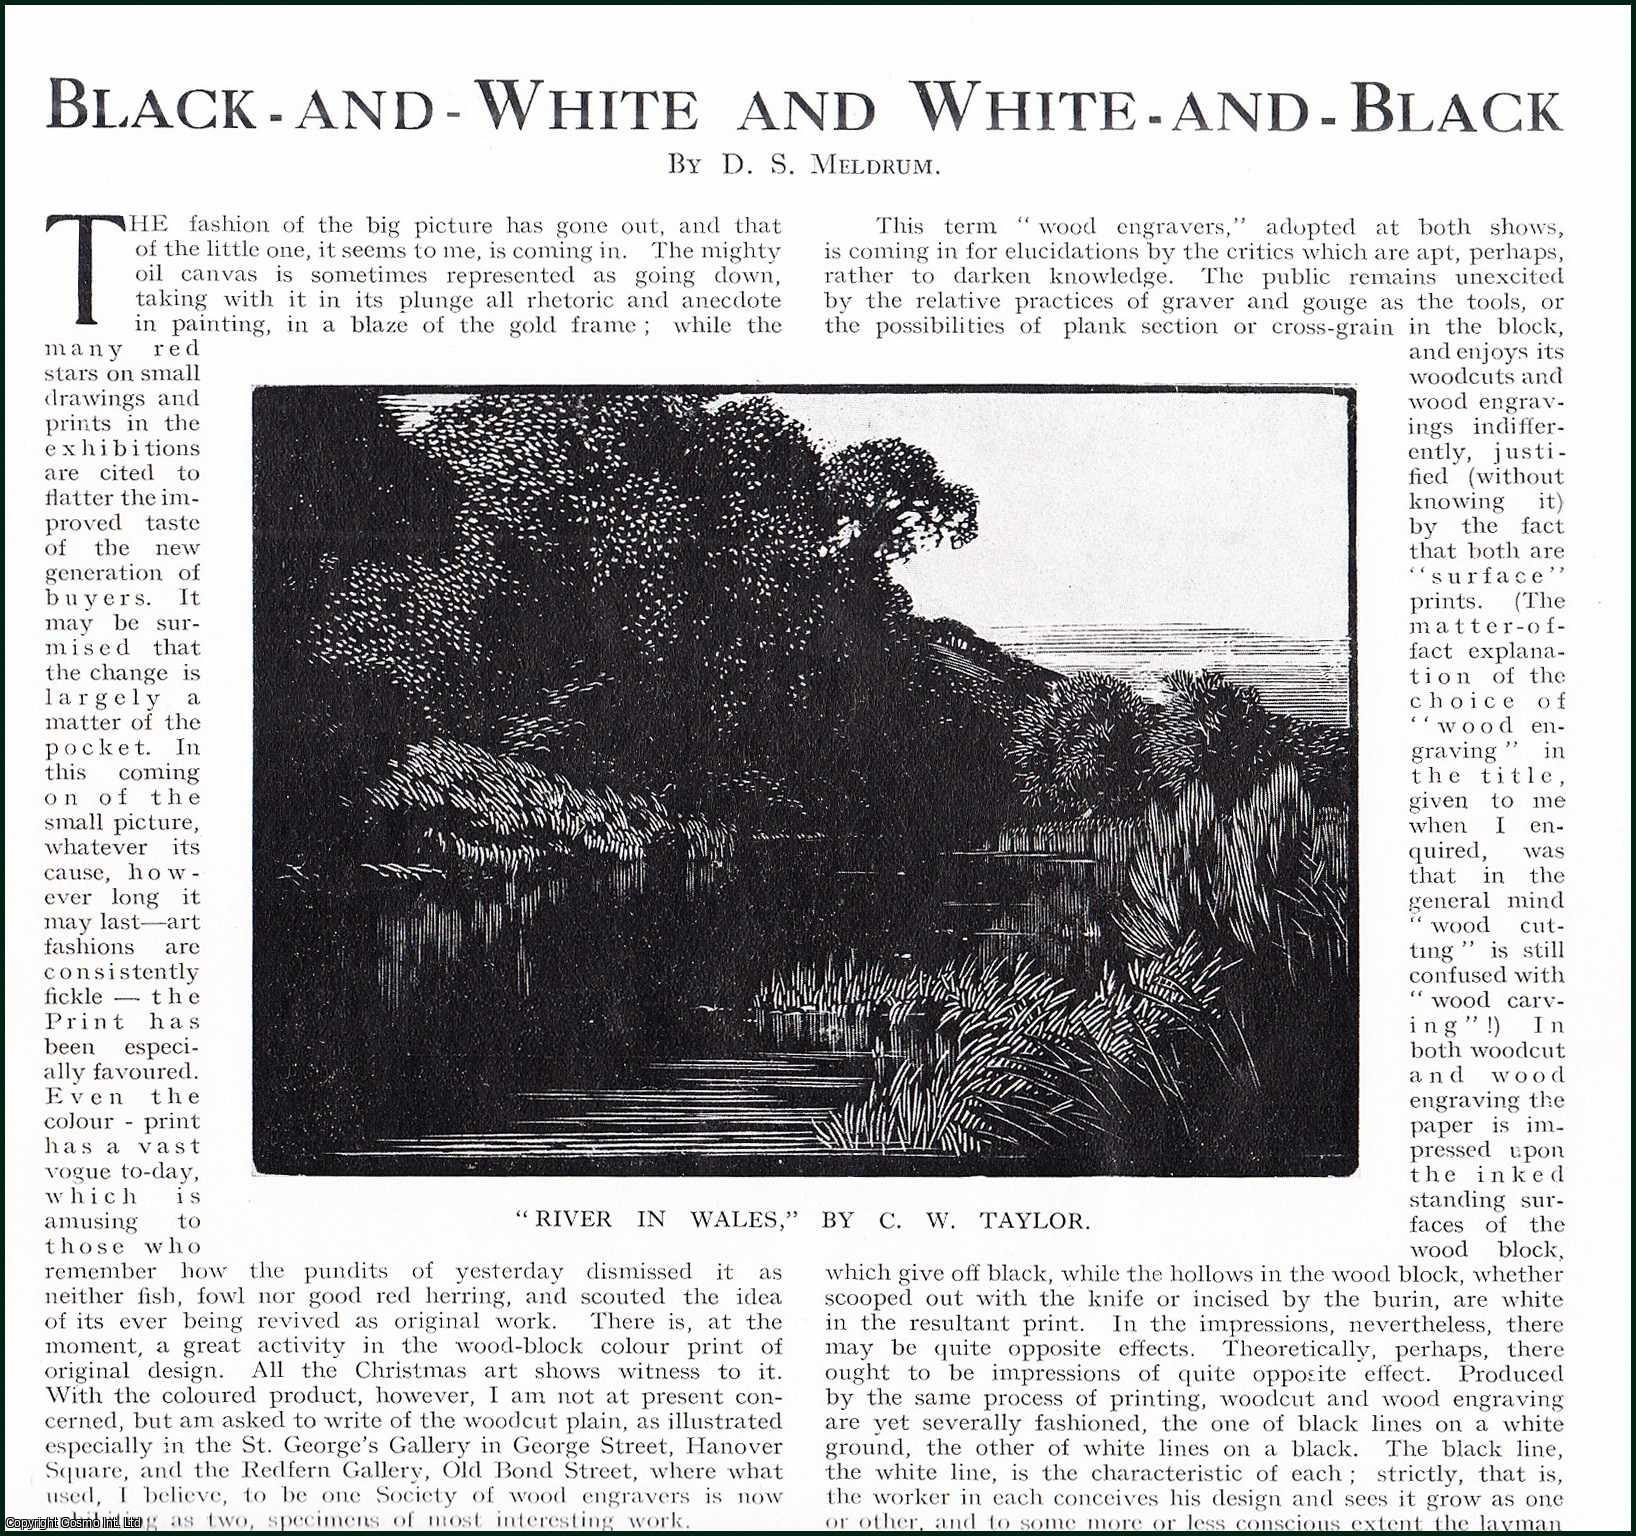 D.S. Meldrum - Black-and-White & White-and-Black : Richmond Park, by Marjory Firth ; Bloomsbury Roofs, by J. Elspeth Robertson ; Mussel Gatherers at Toulon & more. Several pictures and accompanying text, removed from an original issue of Country Life Magazine, 1926.